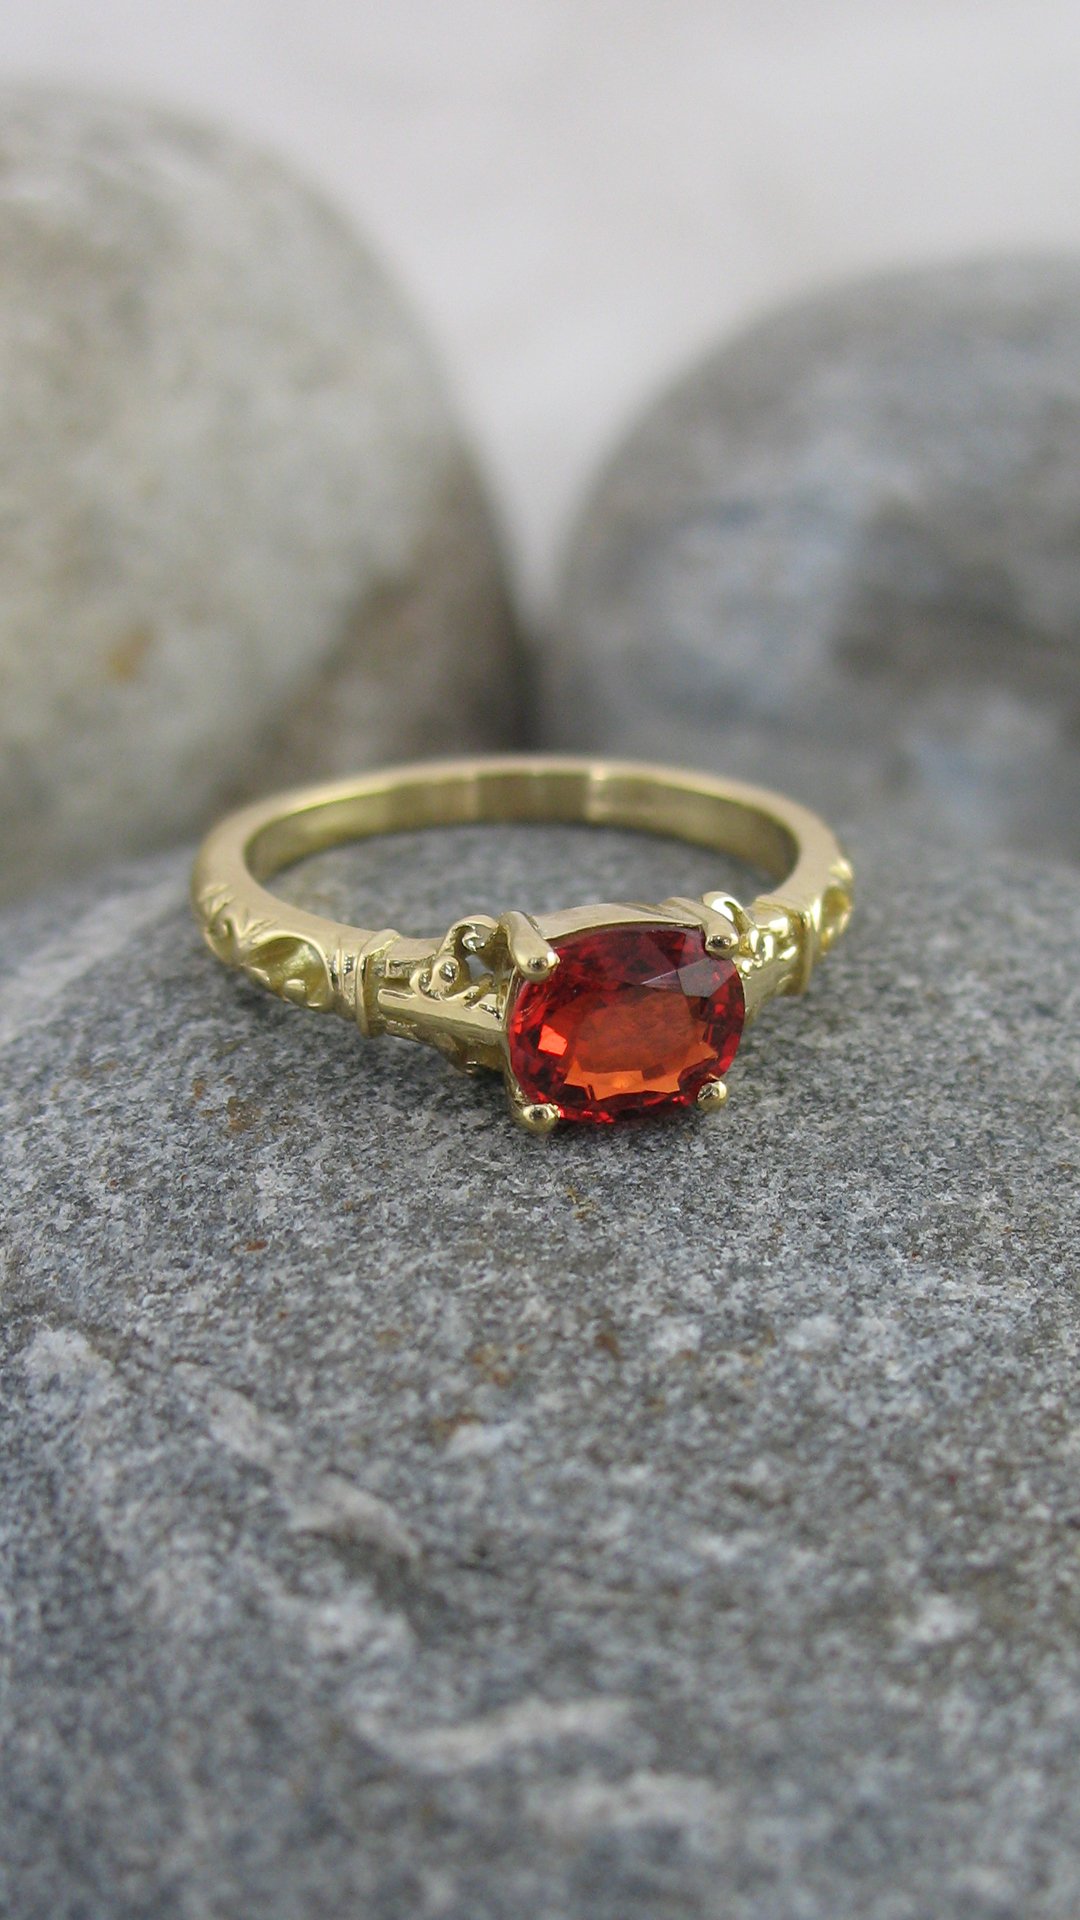 A vibrant cushion shaped red spinel ring